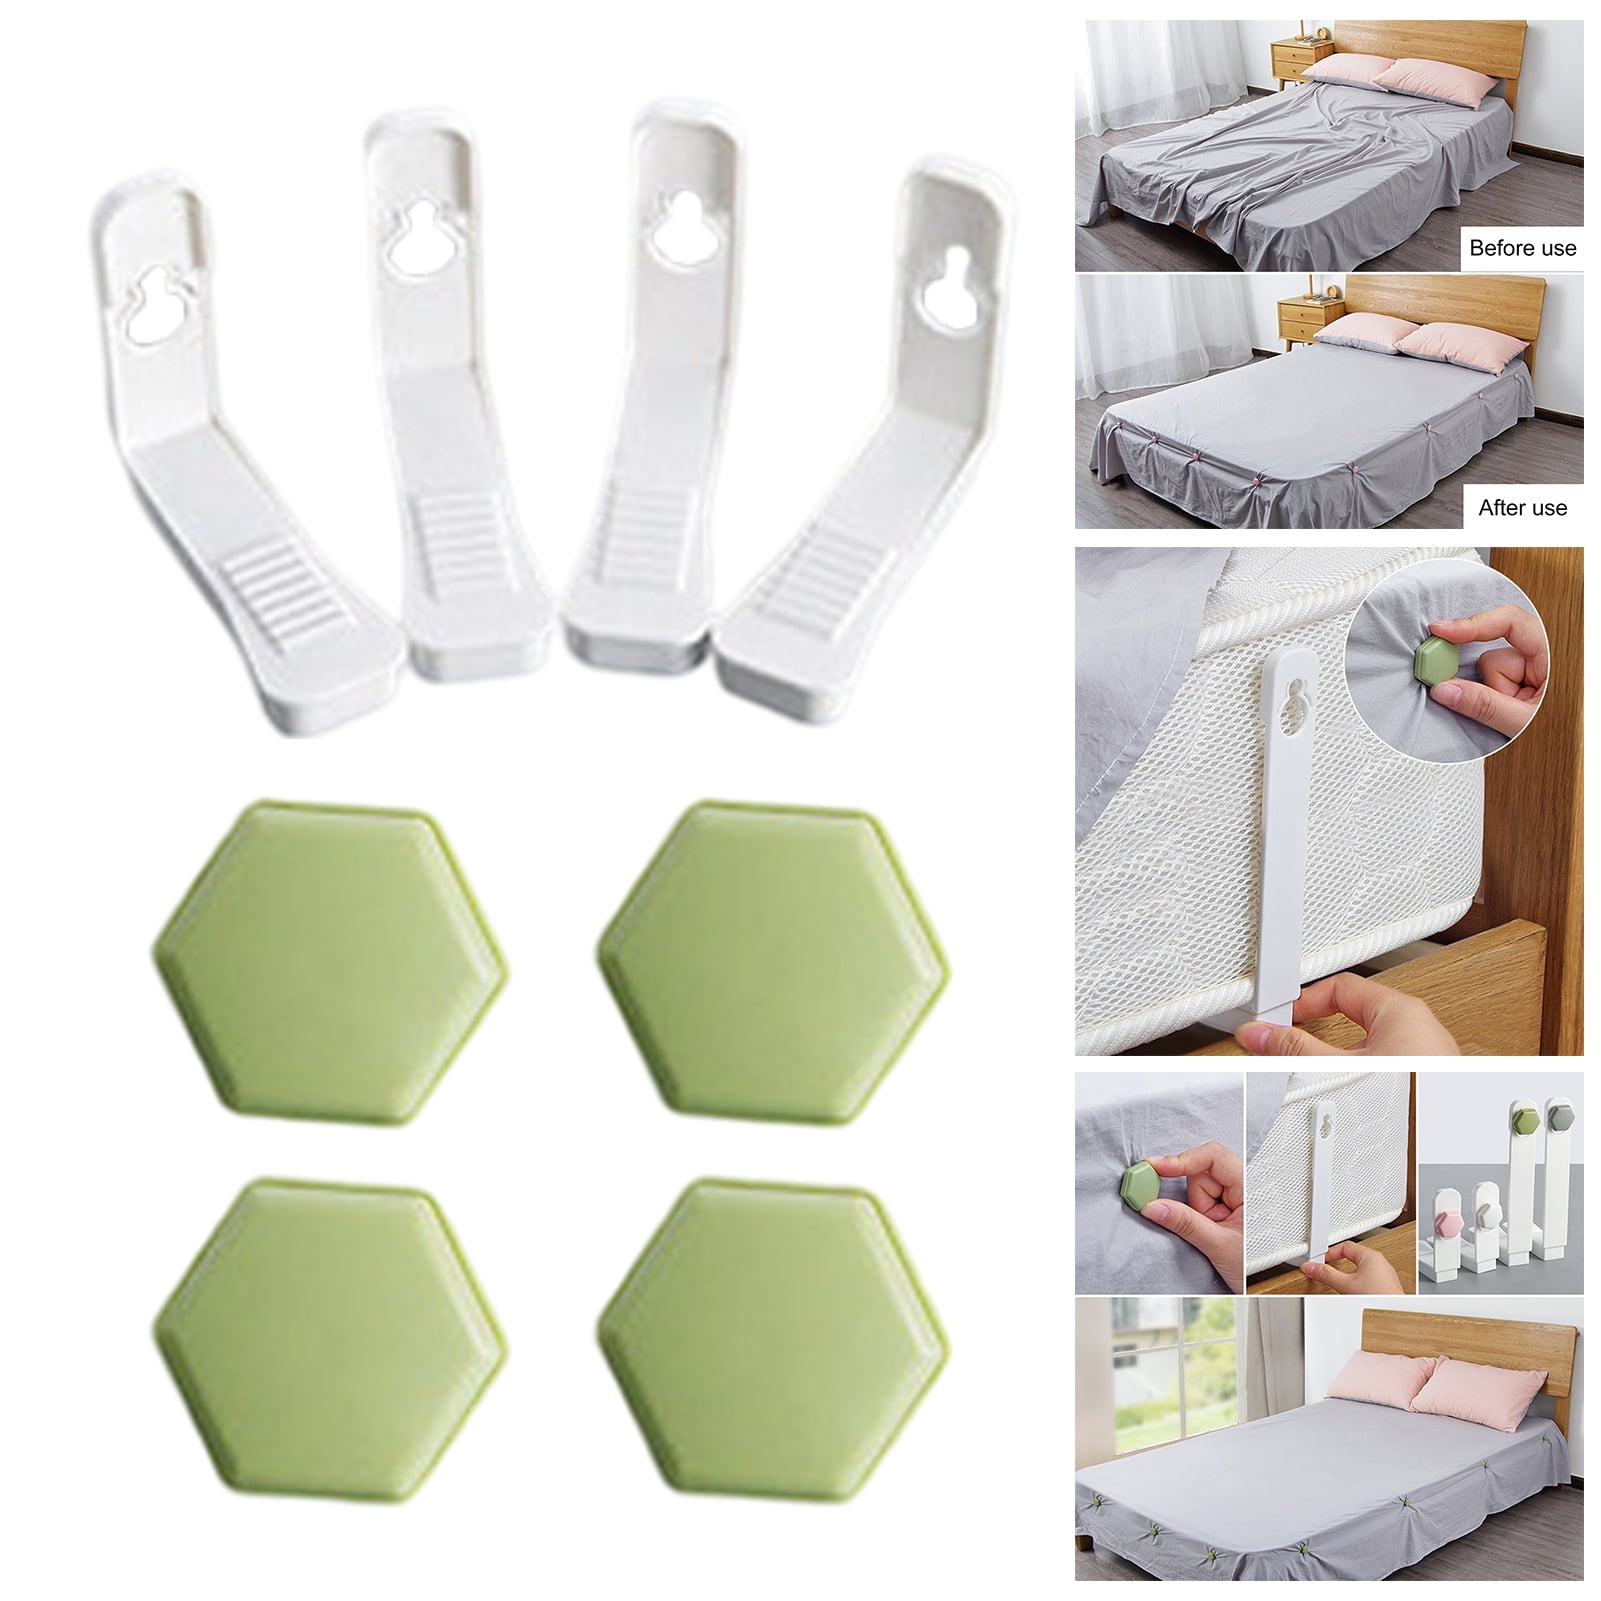 4pcs / set bed sheet clip bed sheet strap stabilizer - Infinity Store USA